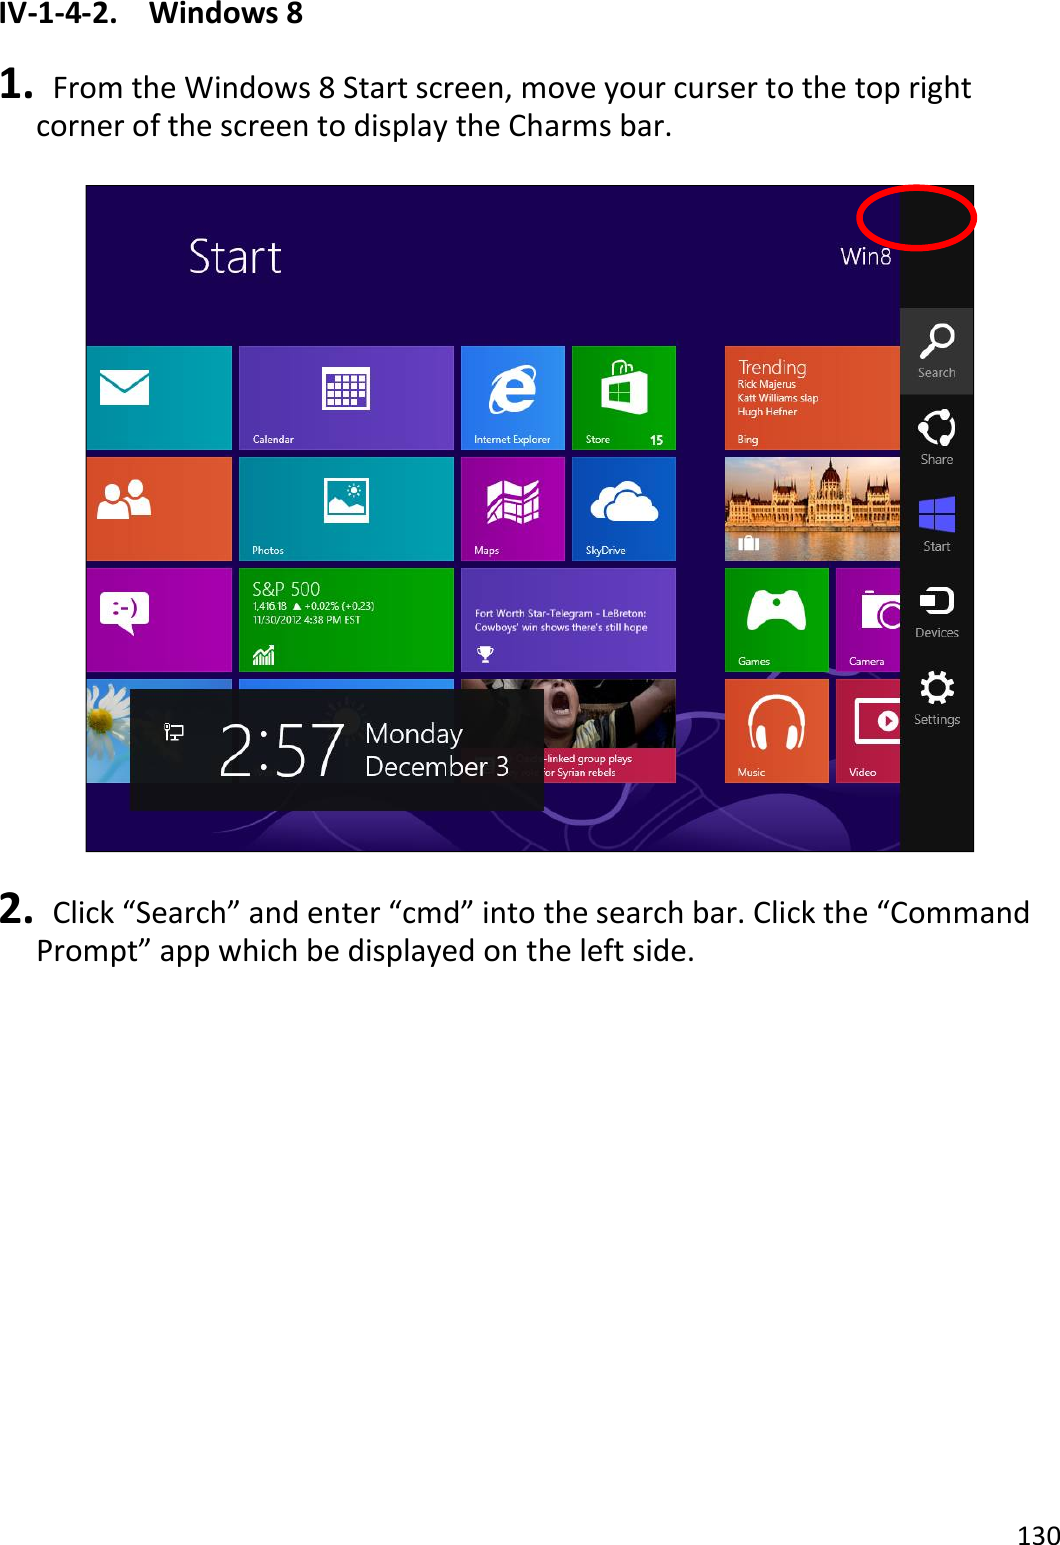 130  IV-1-4-2.  Windows 8  1.   From the Windows 8 Start screen, move your curser to the top right corner of the screen to display the Charms bar.    2.   Click “Search” and enter “cmd” into the search bar. Click the “Command Prompt” app which be displayed on the left side.  